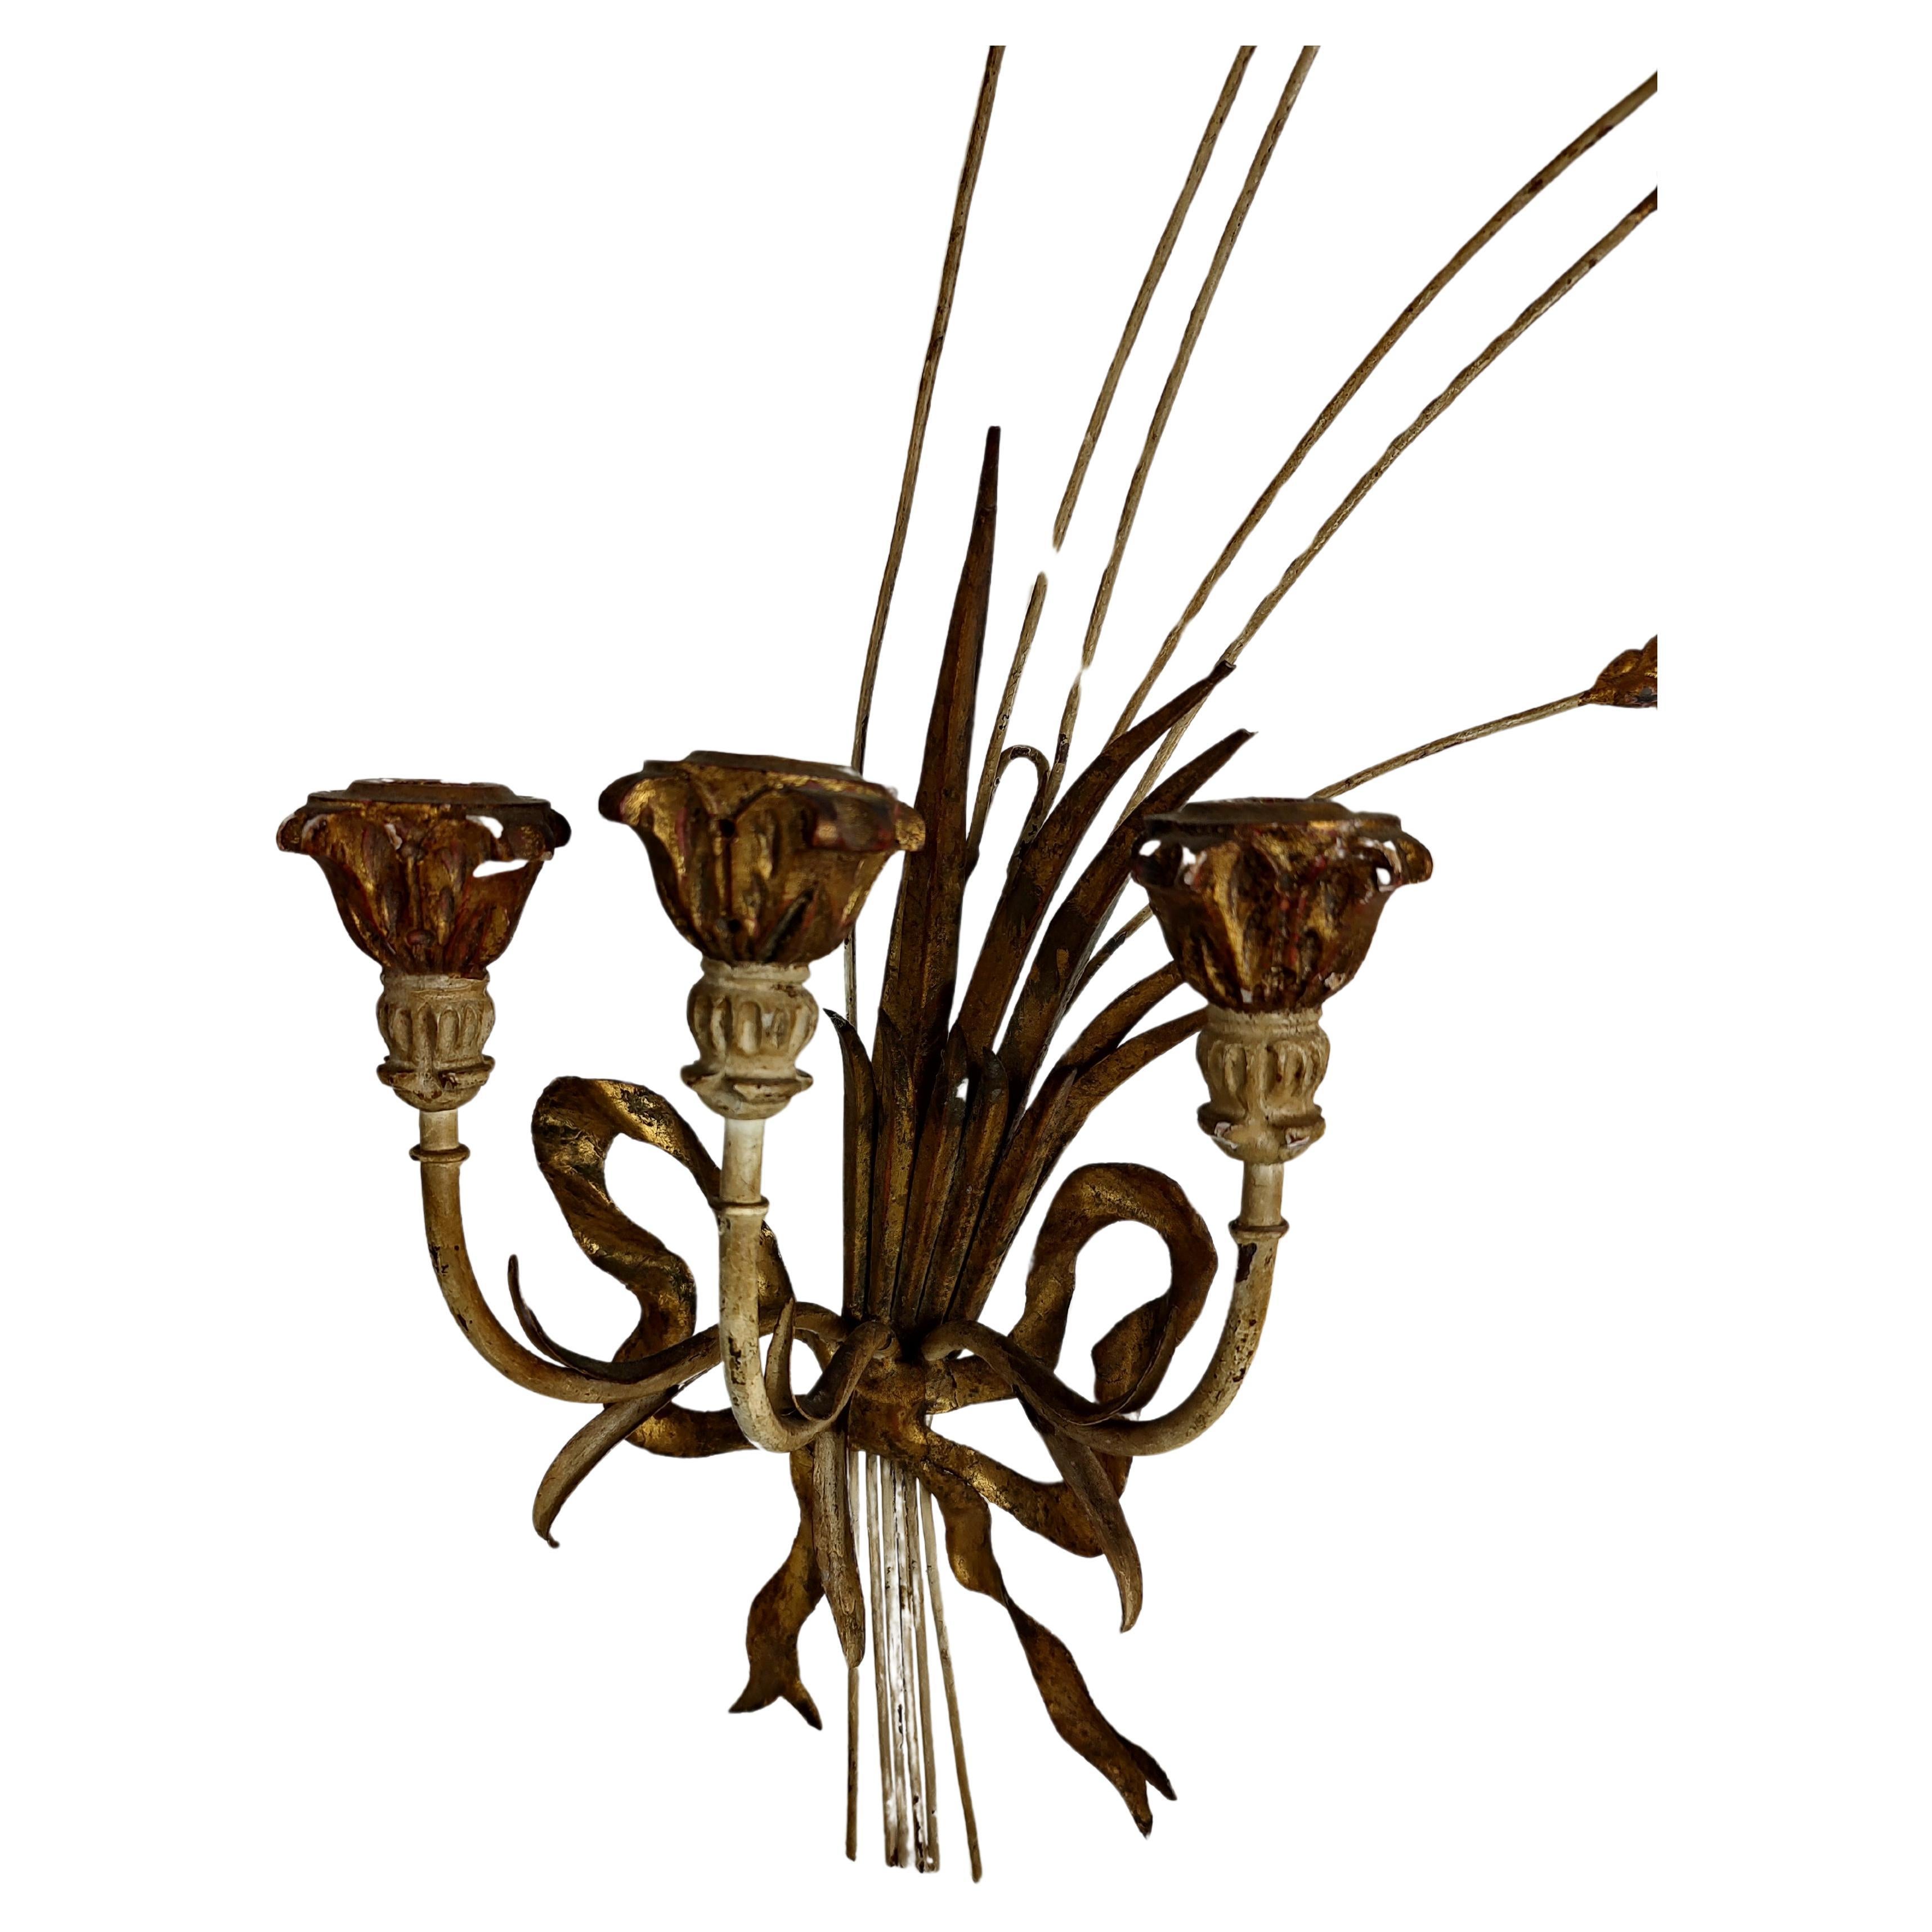 Simple and elegant pair of Hollywood regency gilt sheaf of wheat candle sconces with a bow tie banding it together. In excellent vintage condition with minimal wear. Sold as a pair each sconce has three candle holders. This is not electrified.